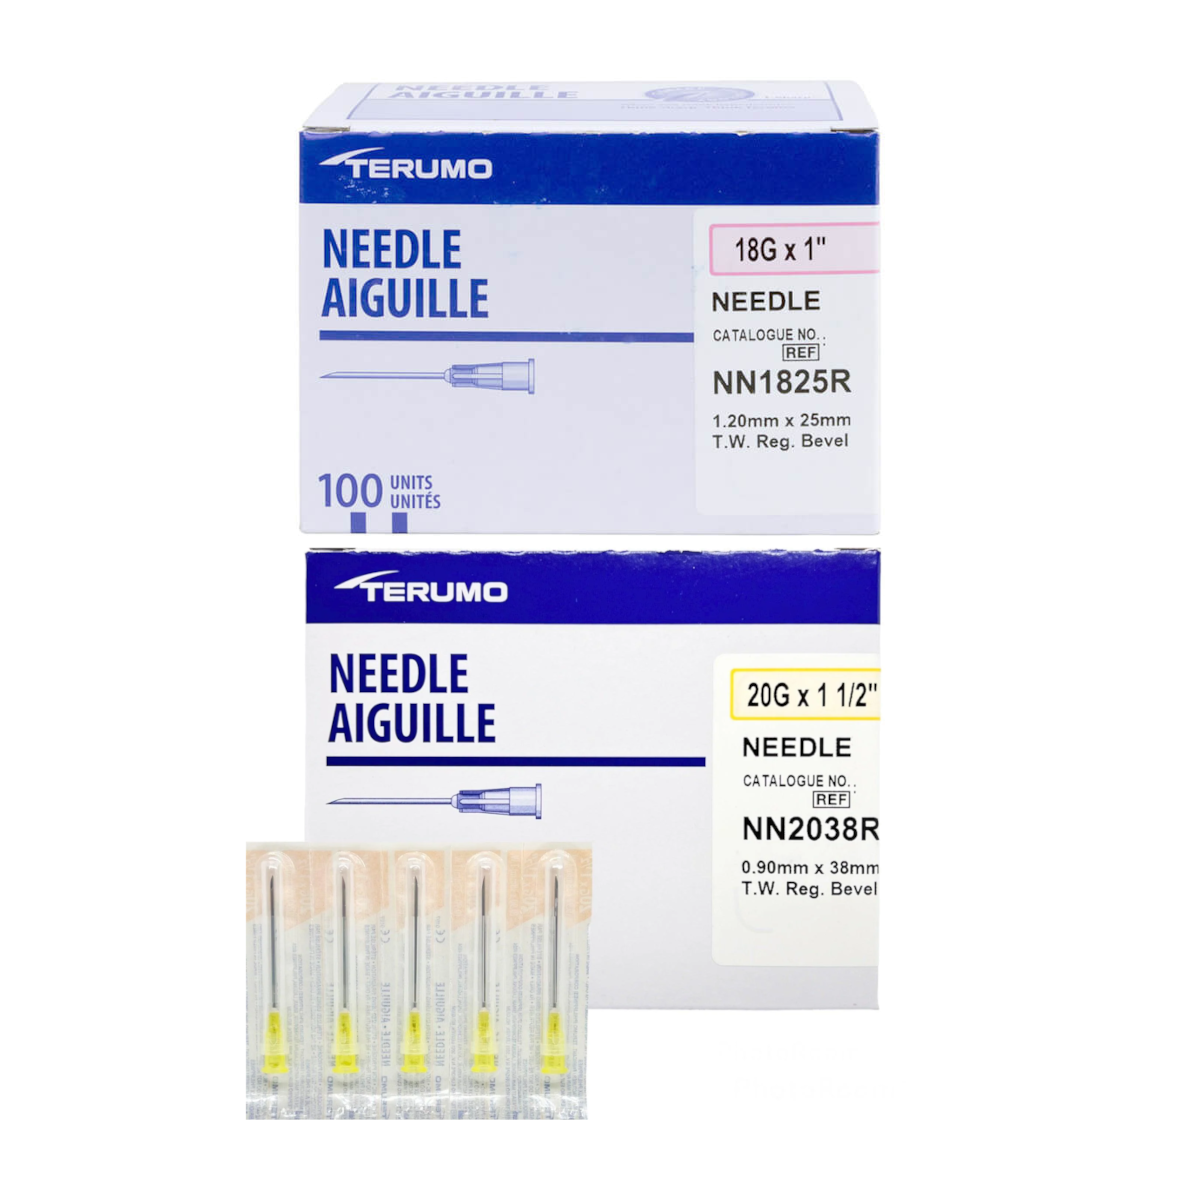 termuno h sterilehypodermic needles for injections